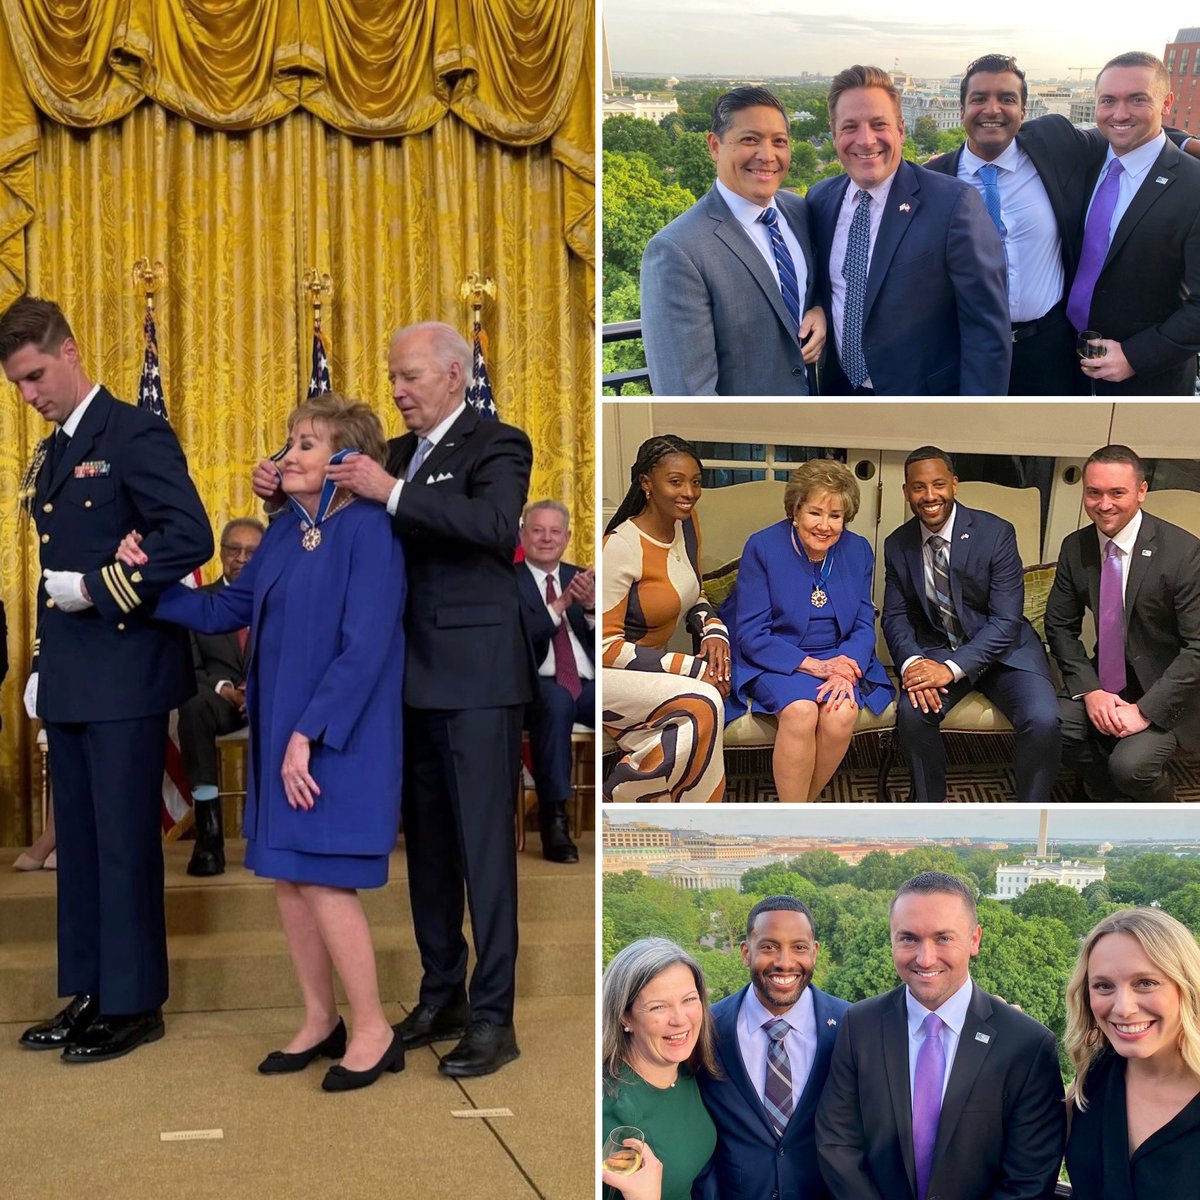 Honored to celebrate Senator Elizabeth Dole yesterday after she received the Presidential Medal of Freedom, the highest civilian honor awarded in the US. 

Senator Dole truly is one of our nation’s most dedicated public servants - a well deserved recognition!

@DoleFoundation